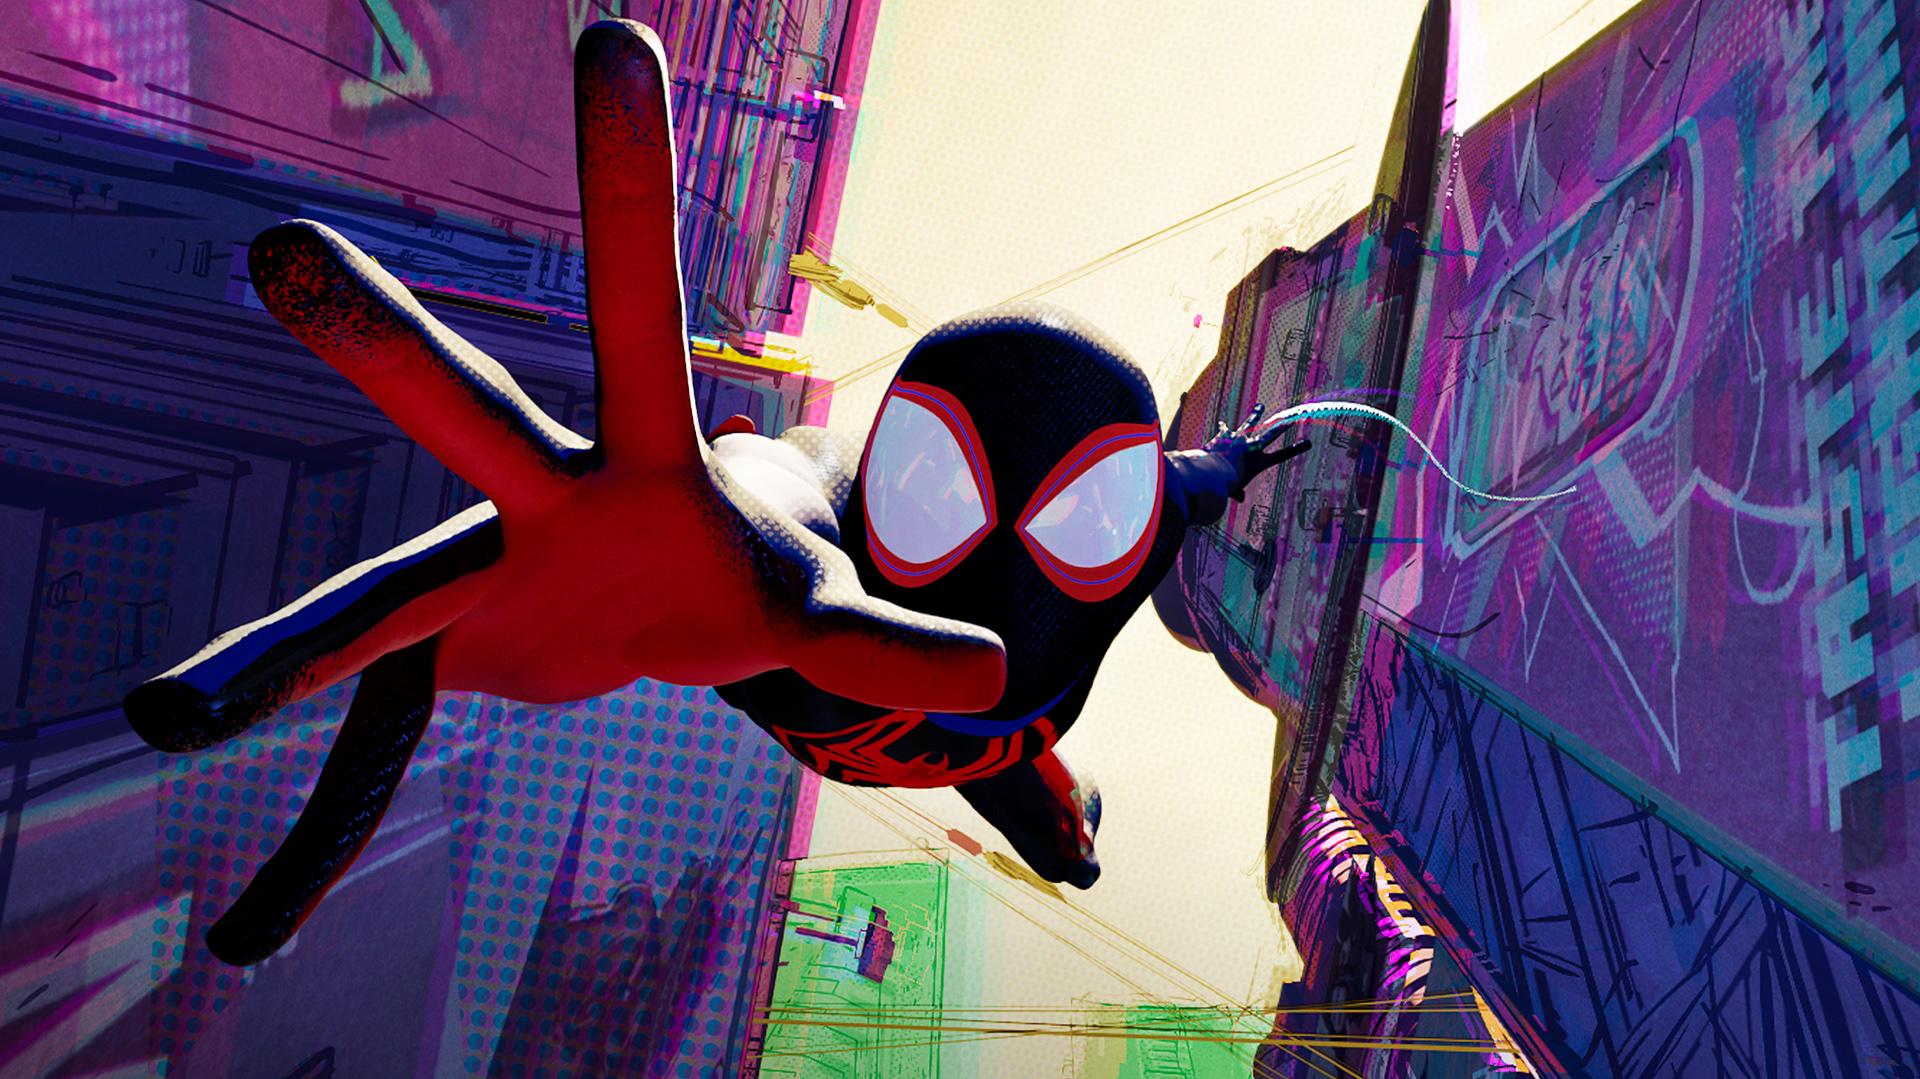 Spider Man Into The Spider Verse Full HD 1080p Wallpaper 1920x1080